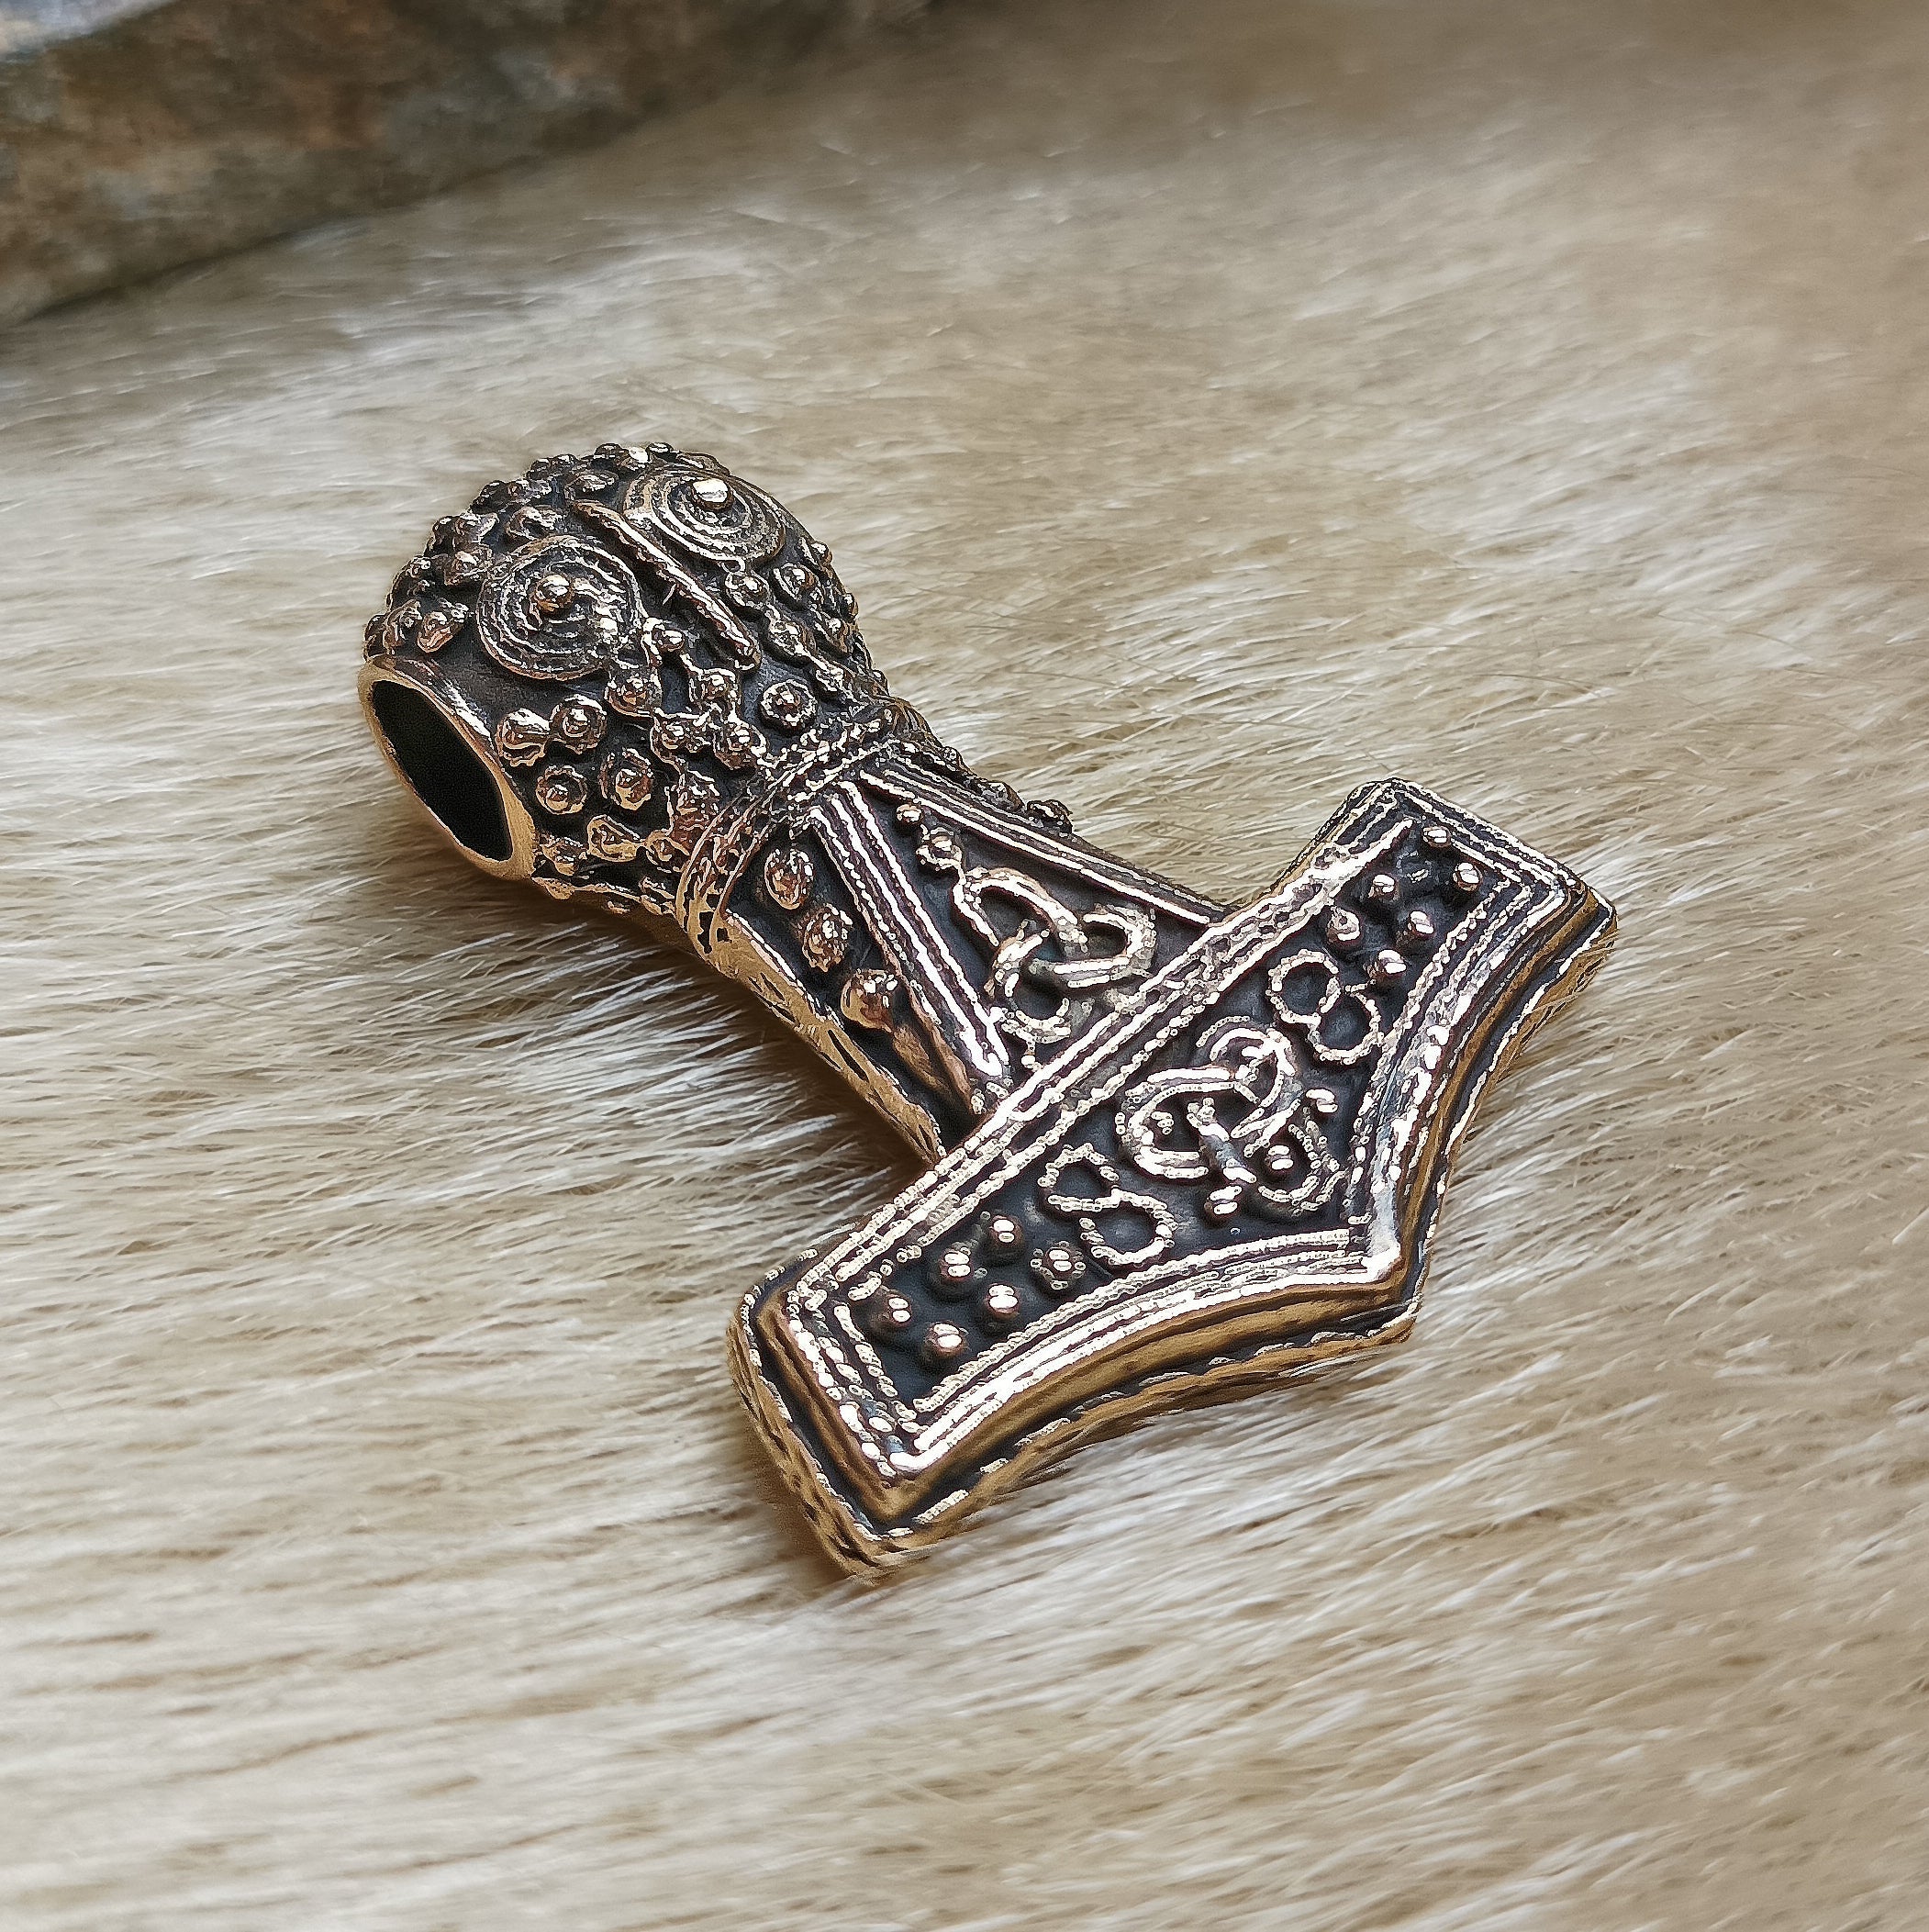 Bronze Replica Thors Hammer Pendant From Öland - Angle View